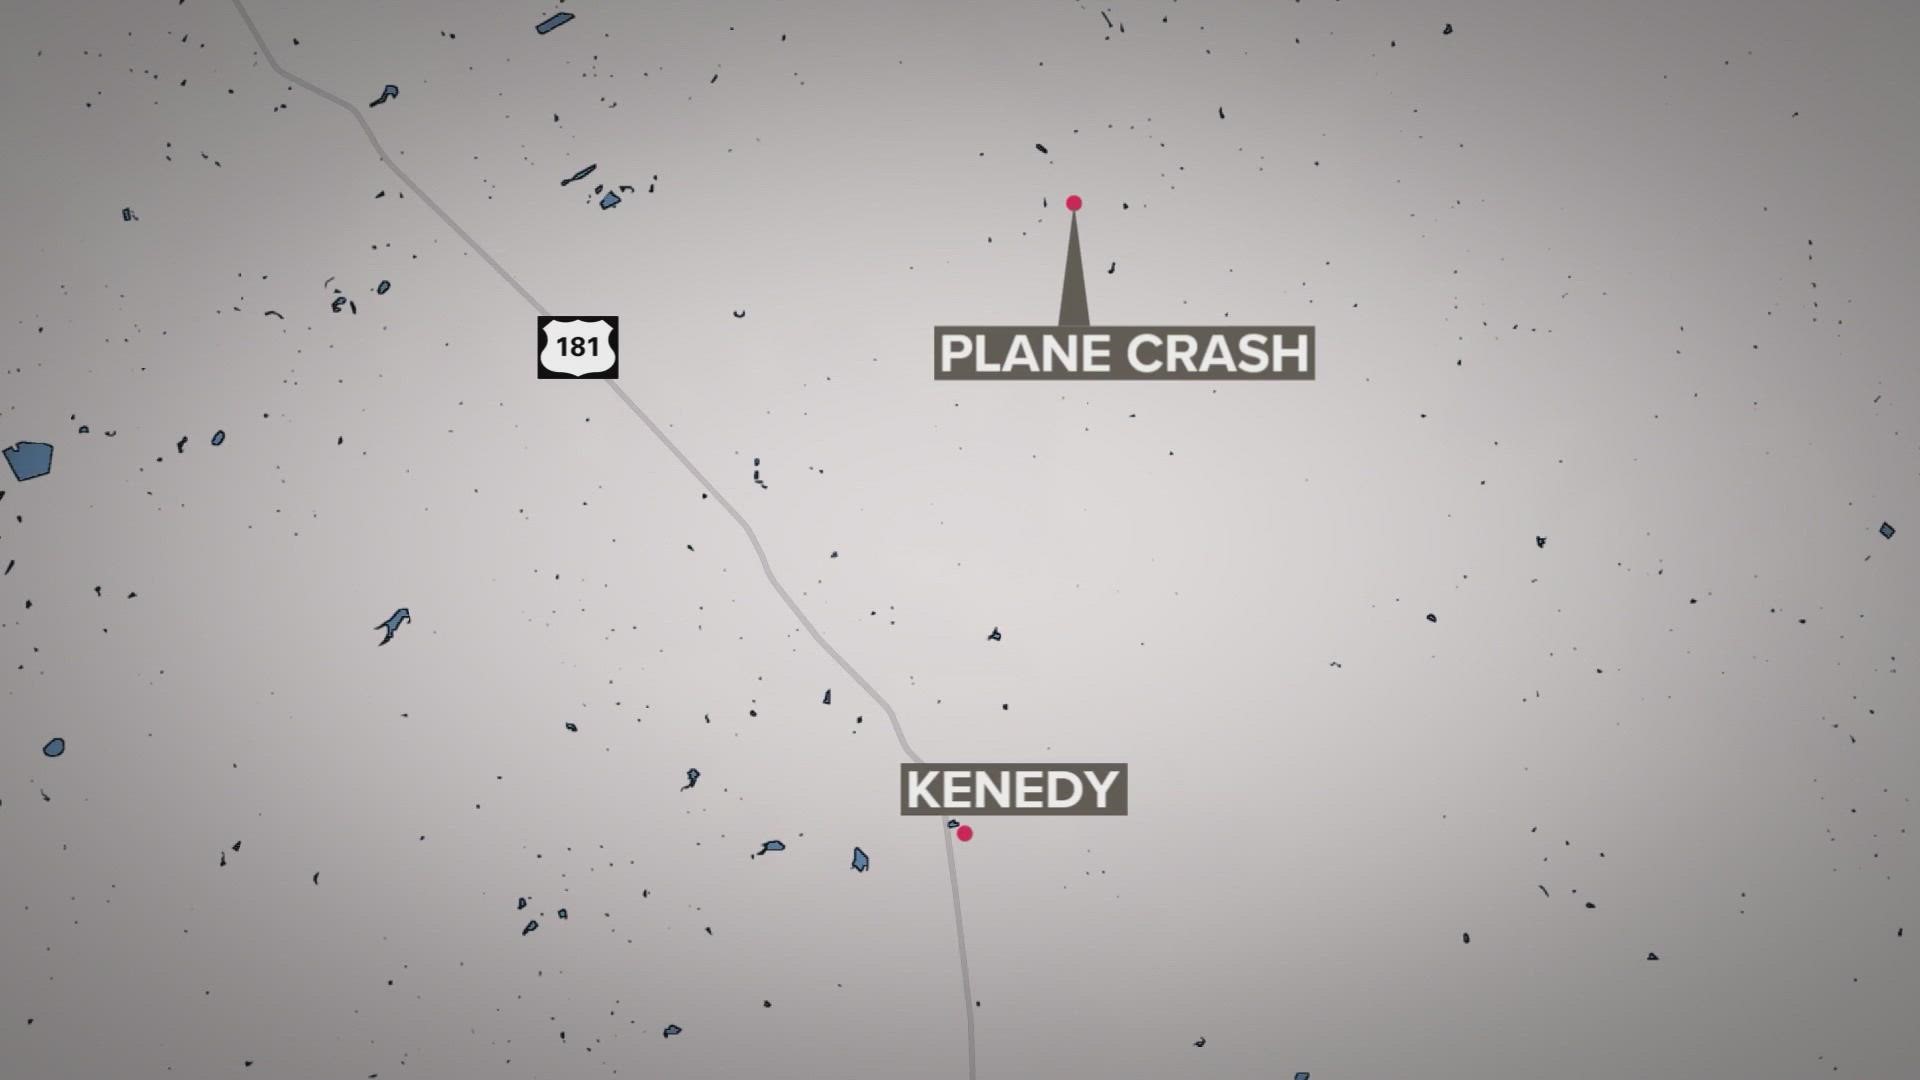 The victims were identified as a 32-year-old Texas pilot and a male minor.